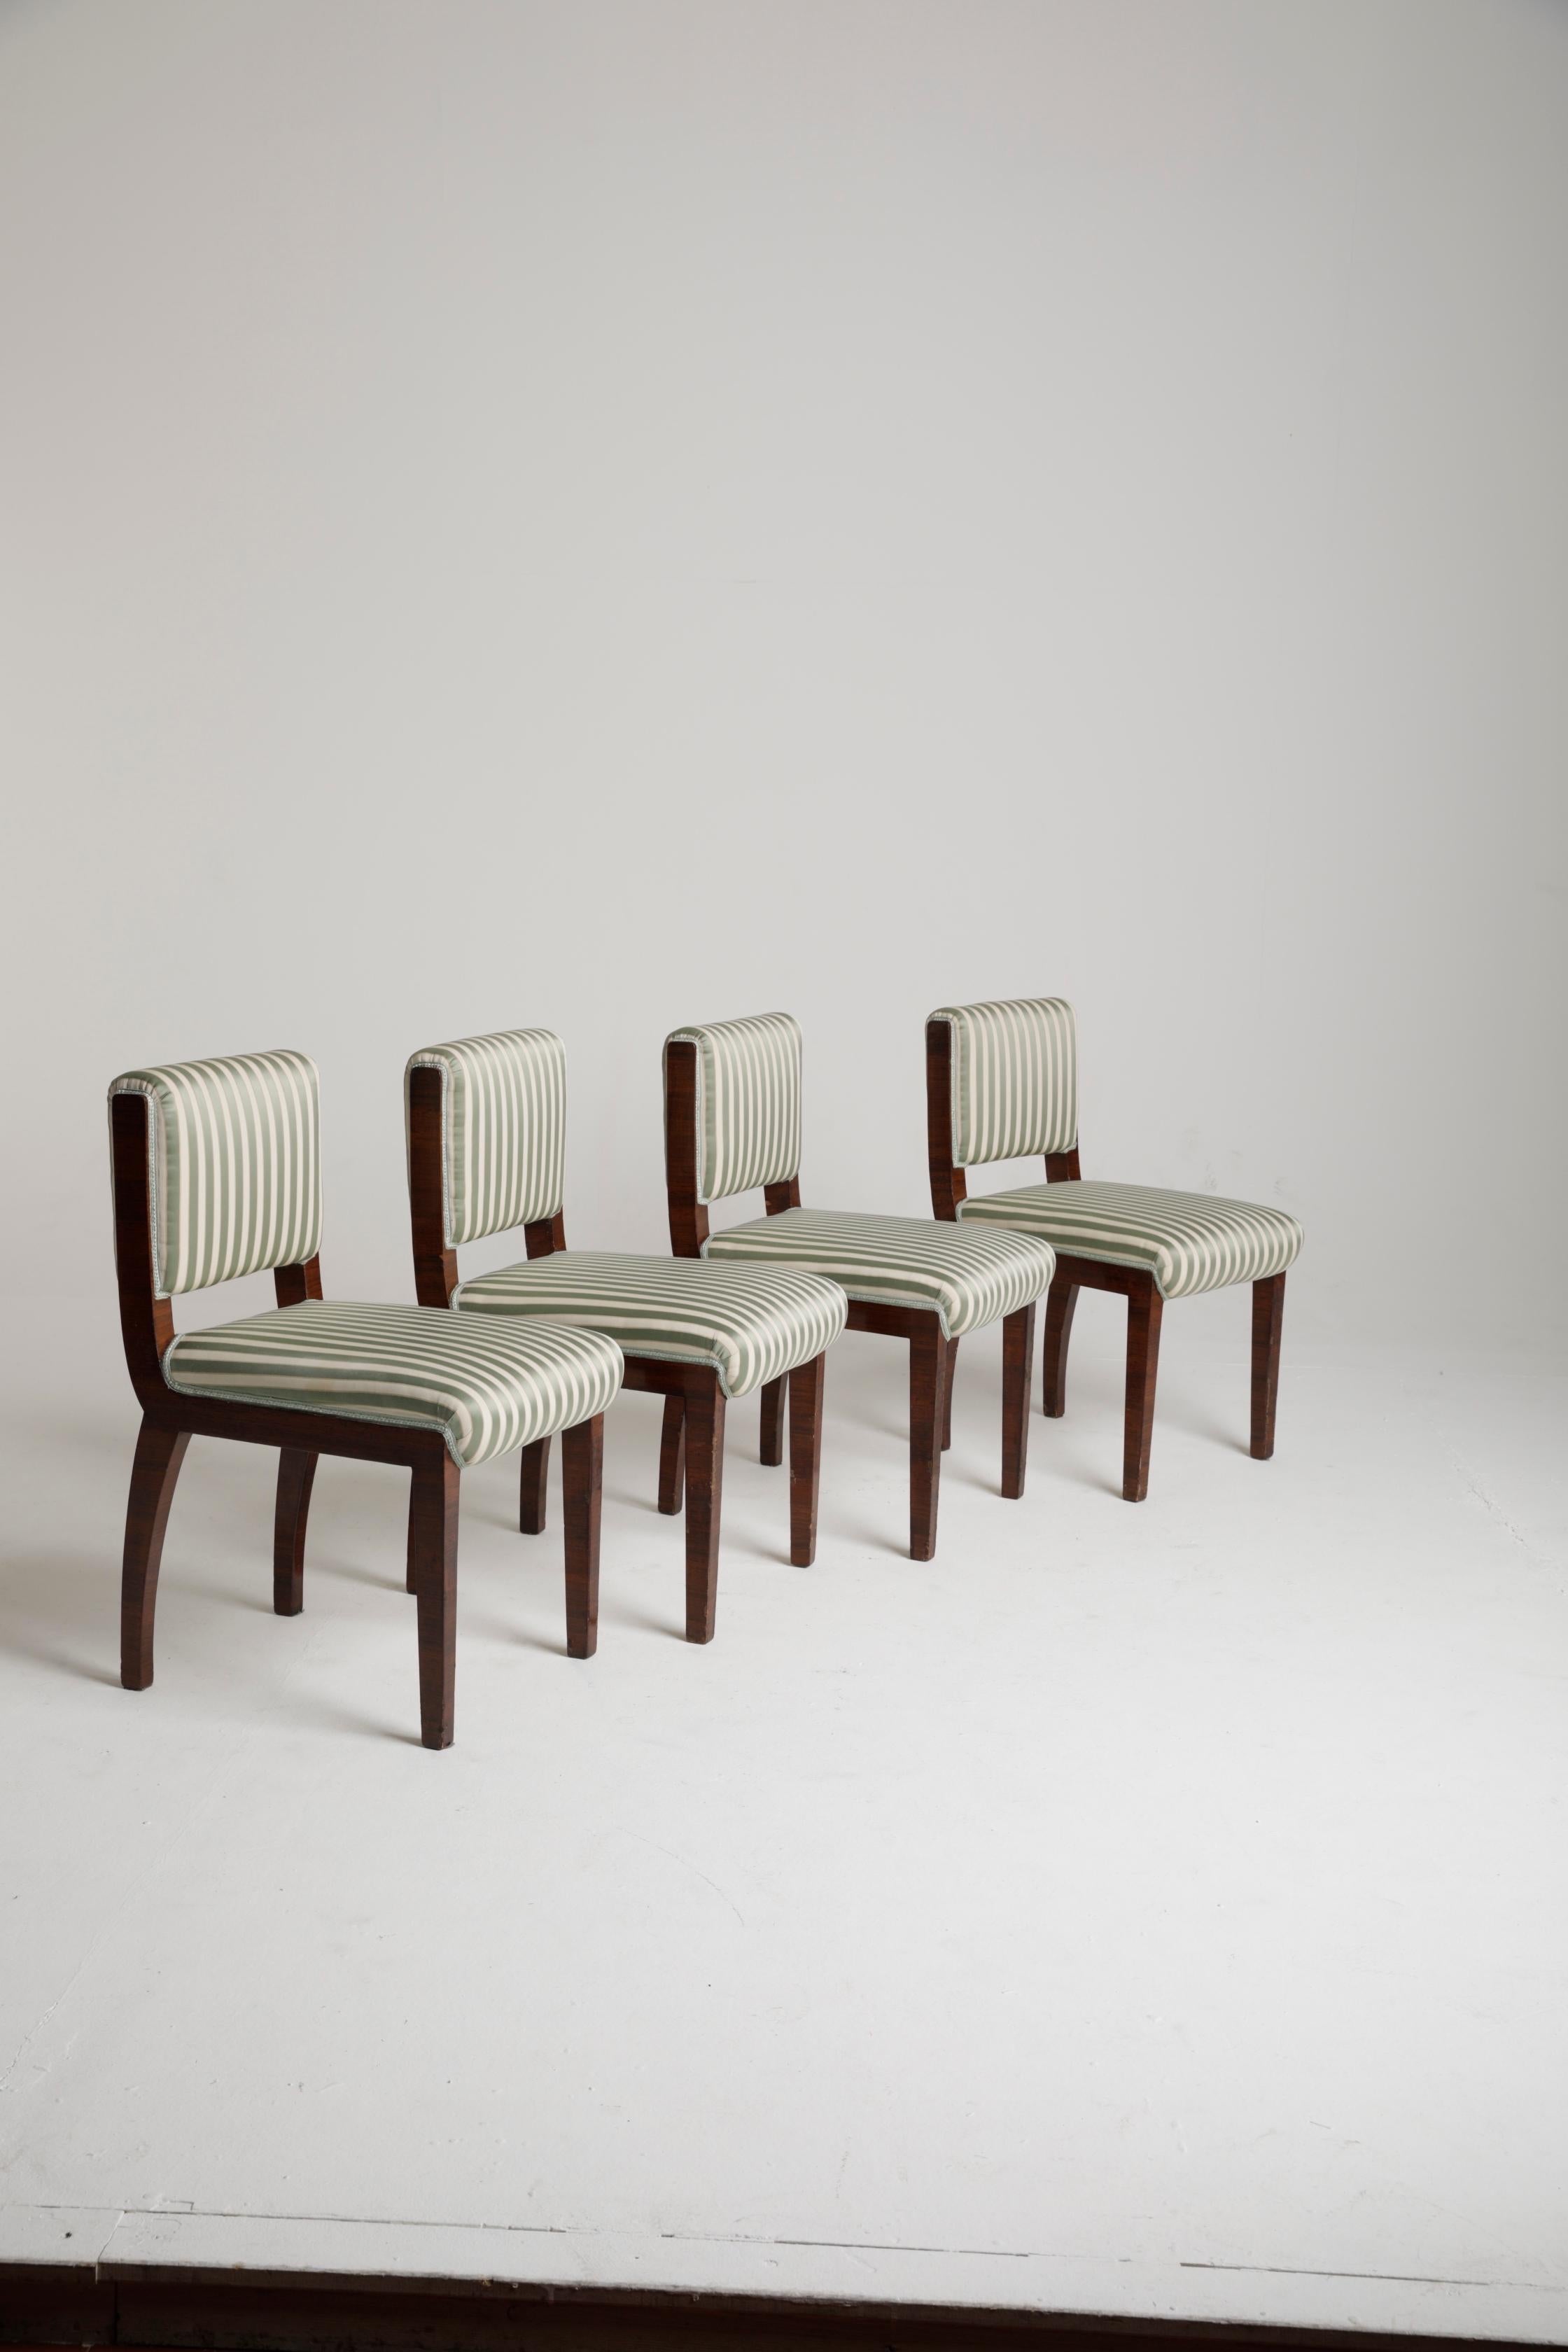 Art Deco Set of 4 Italian Art Déco Chairs, Melchiorre Bega (Attr.), Italy, 1930s For Sale